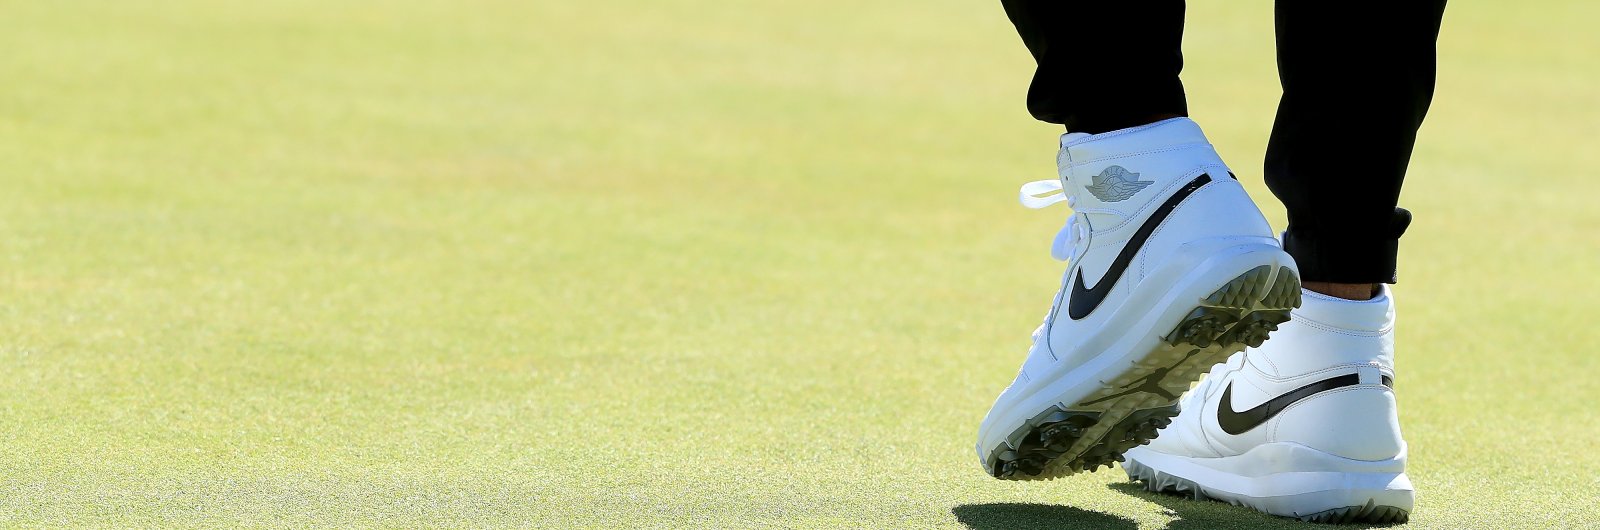 Nike High-Tops at the Open Championship 